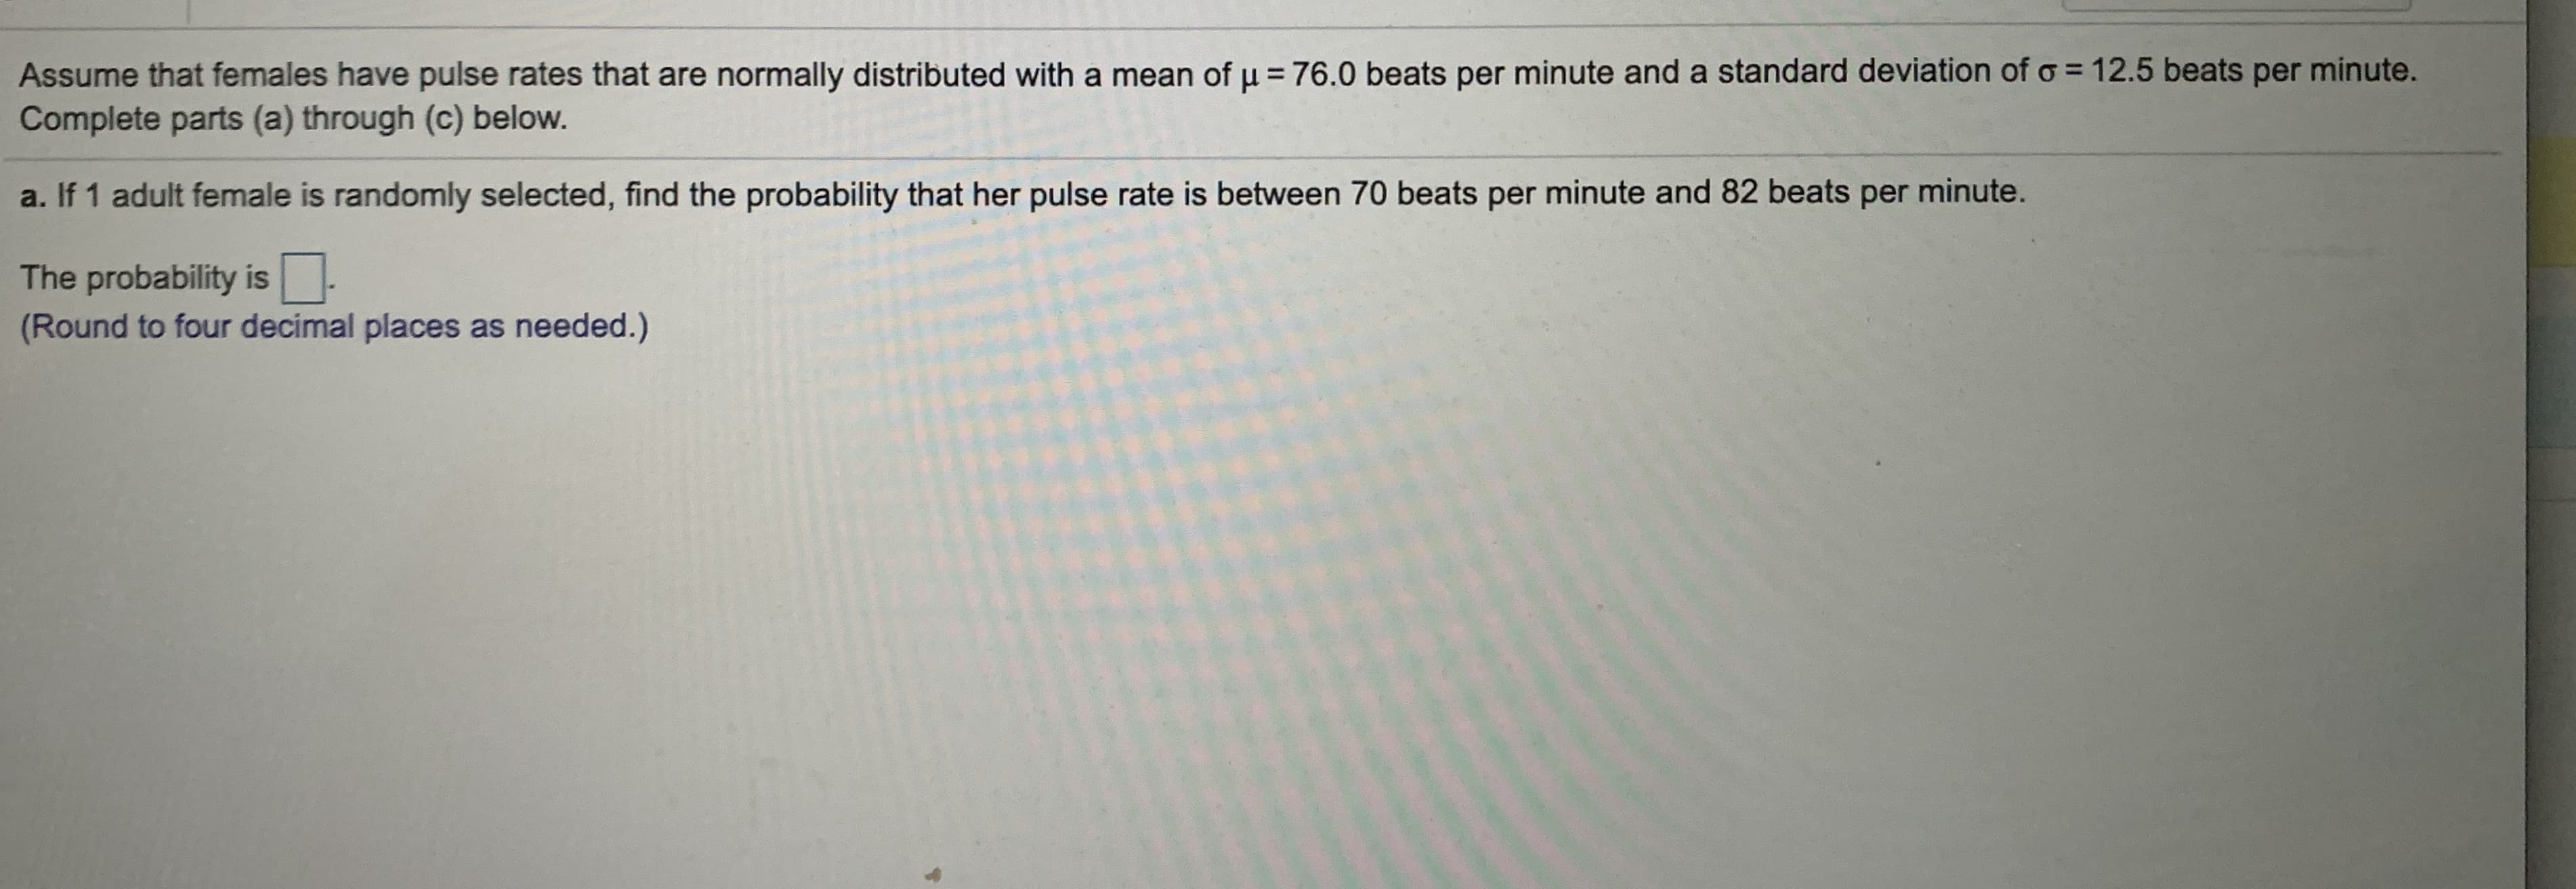 Assume that females have pulse rates that are normally distributed with a mean of u = 76.0 beats per minute and a standard deviation of o = 12.5 beats per minute.
Complete parts (a) through (c) below.
a. If 1 adult female is randomly selected, find the probability that her pulse rate is between 70 beats per minute and 82 beats per minute.
The probability is -
(Round to four decimal places as needed.)
